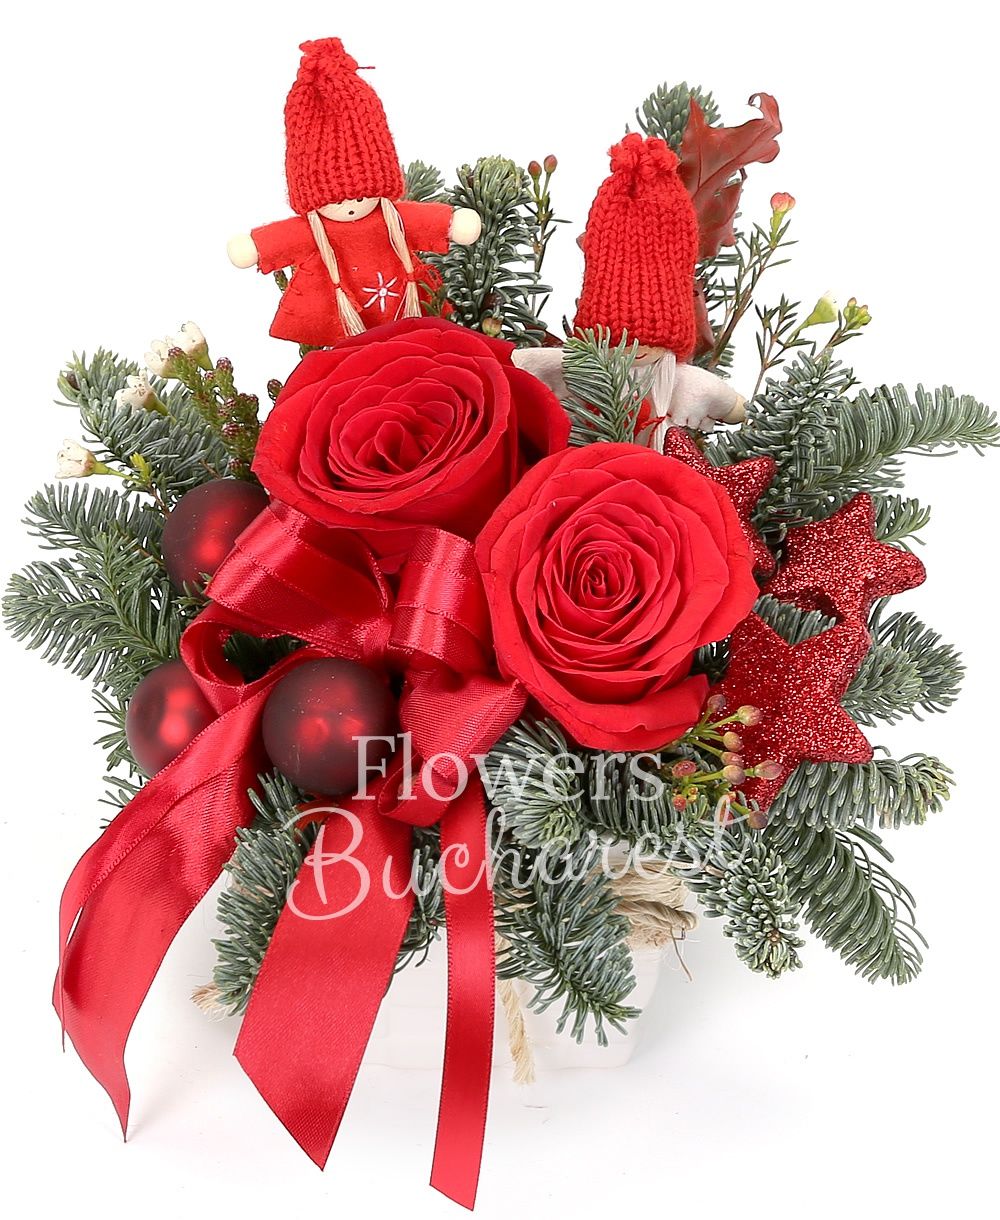 2 red roses, waxflower, brunia, silver fir, christmas decorations, ceramic vase